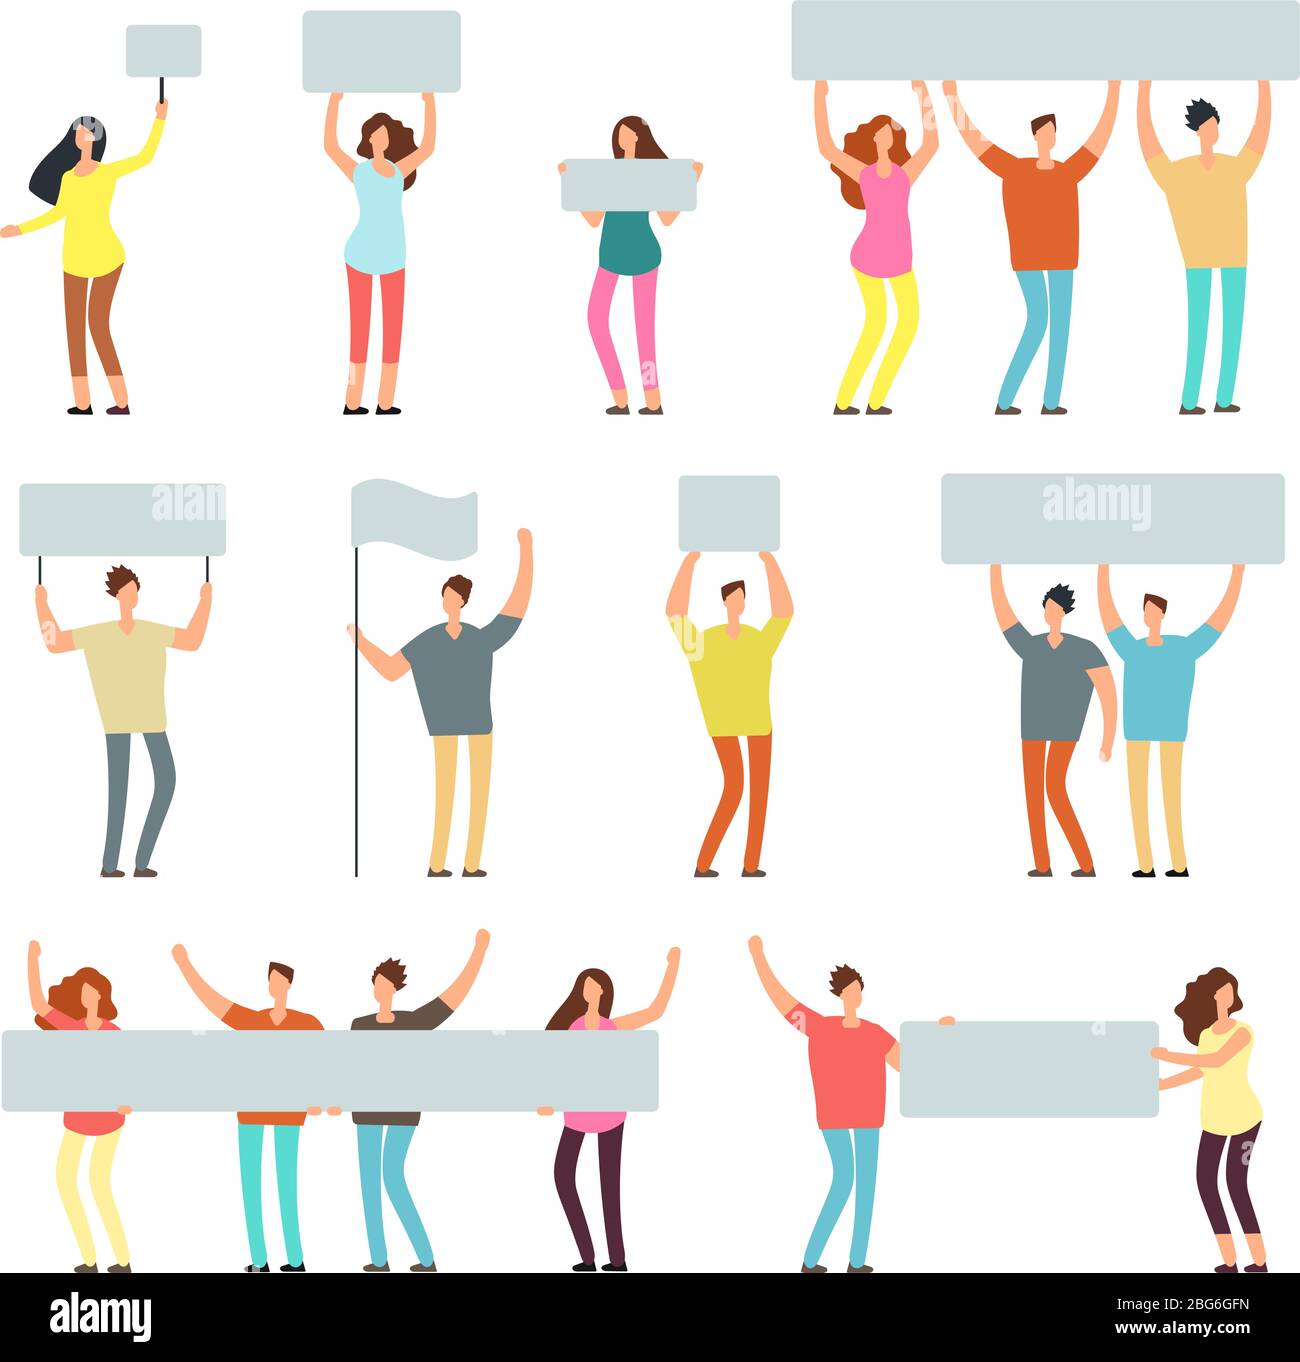 Peaceful man, woman holding banners and placards. People at demonstration, picket. Vector isolated characters for peace protest concept. Demonstration Stock Vector